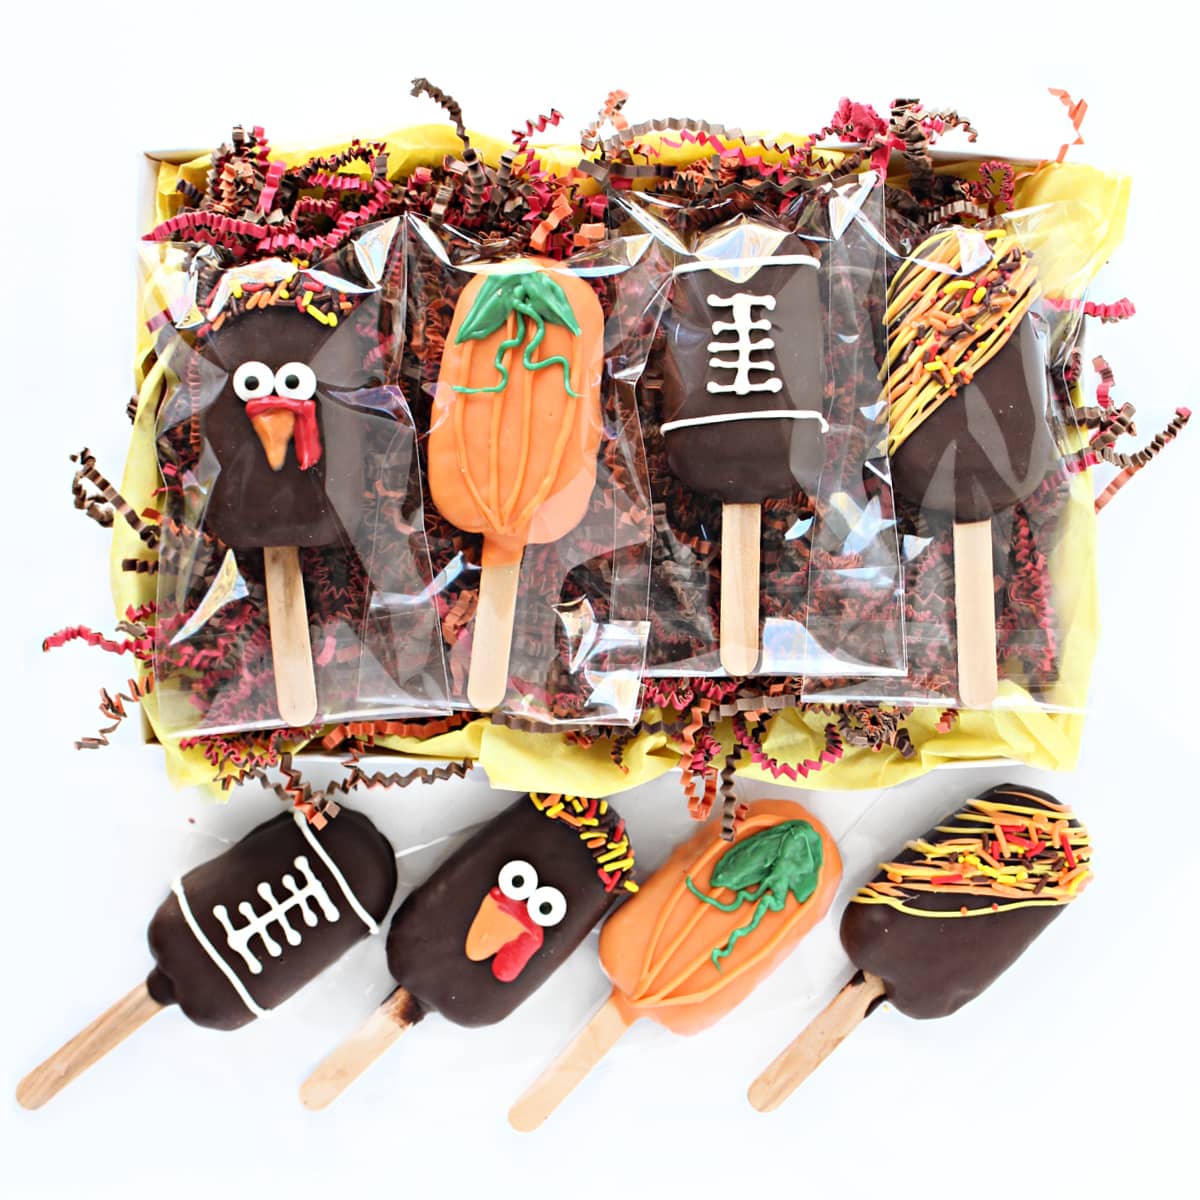 Bagged, decorated ecorated turkey, pumpkin, football, drizzle pops in a gift box.